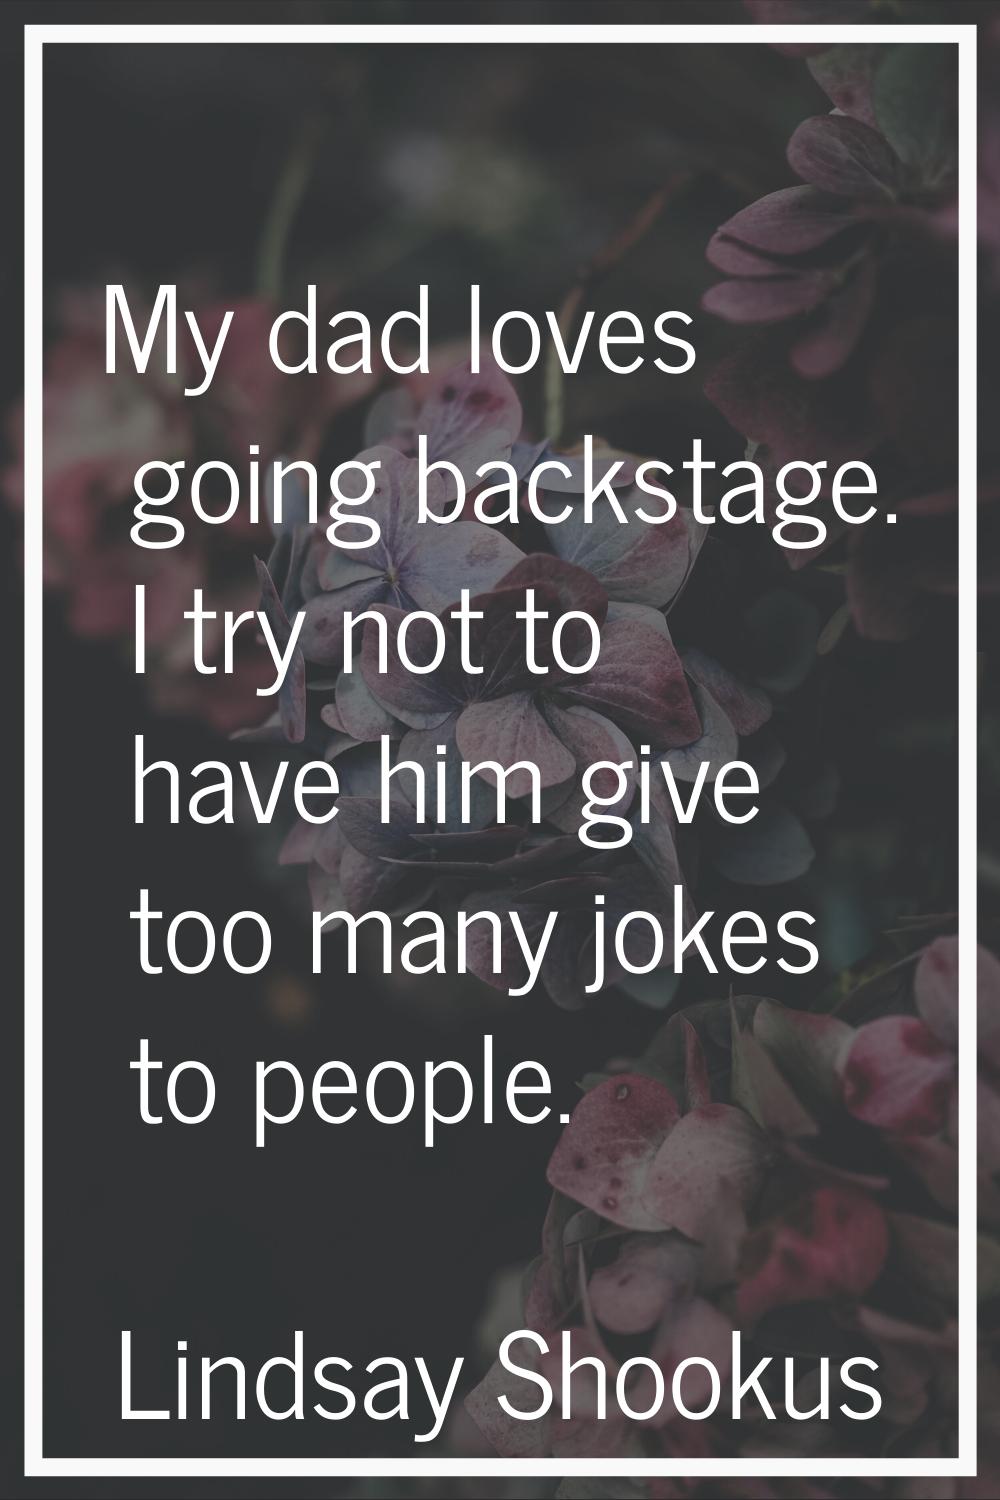 My dad loves going backstage. I try not to have him give too many jokes to people.